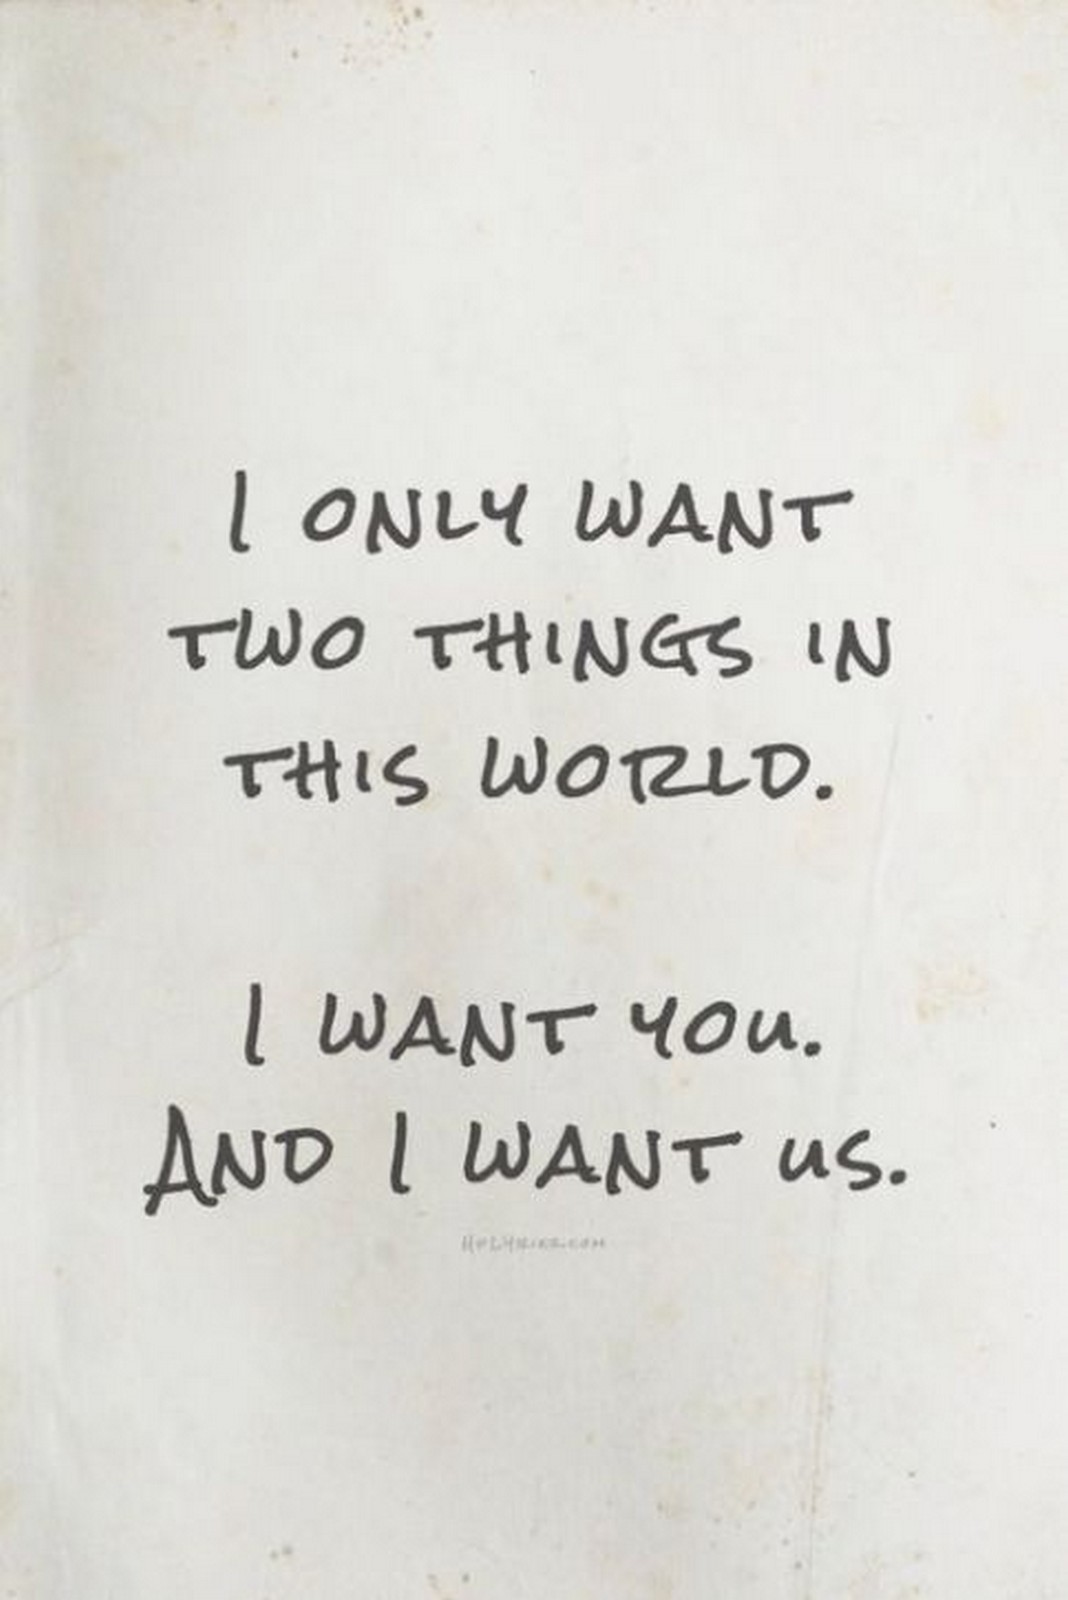 55 Romantic Quotes - "I only want two things in this world. I want you. And I want us."